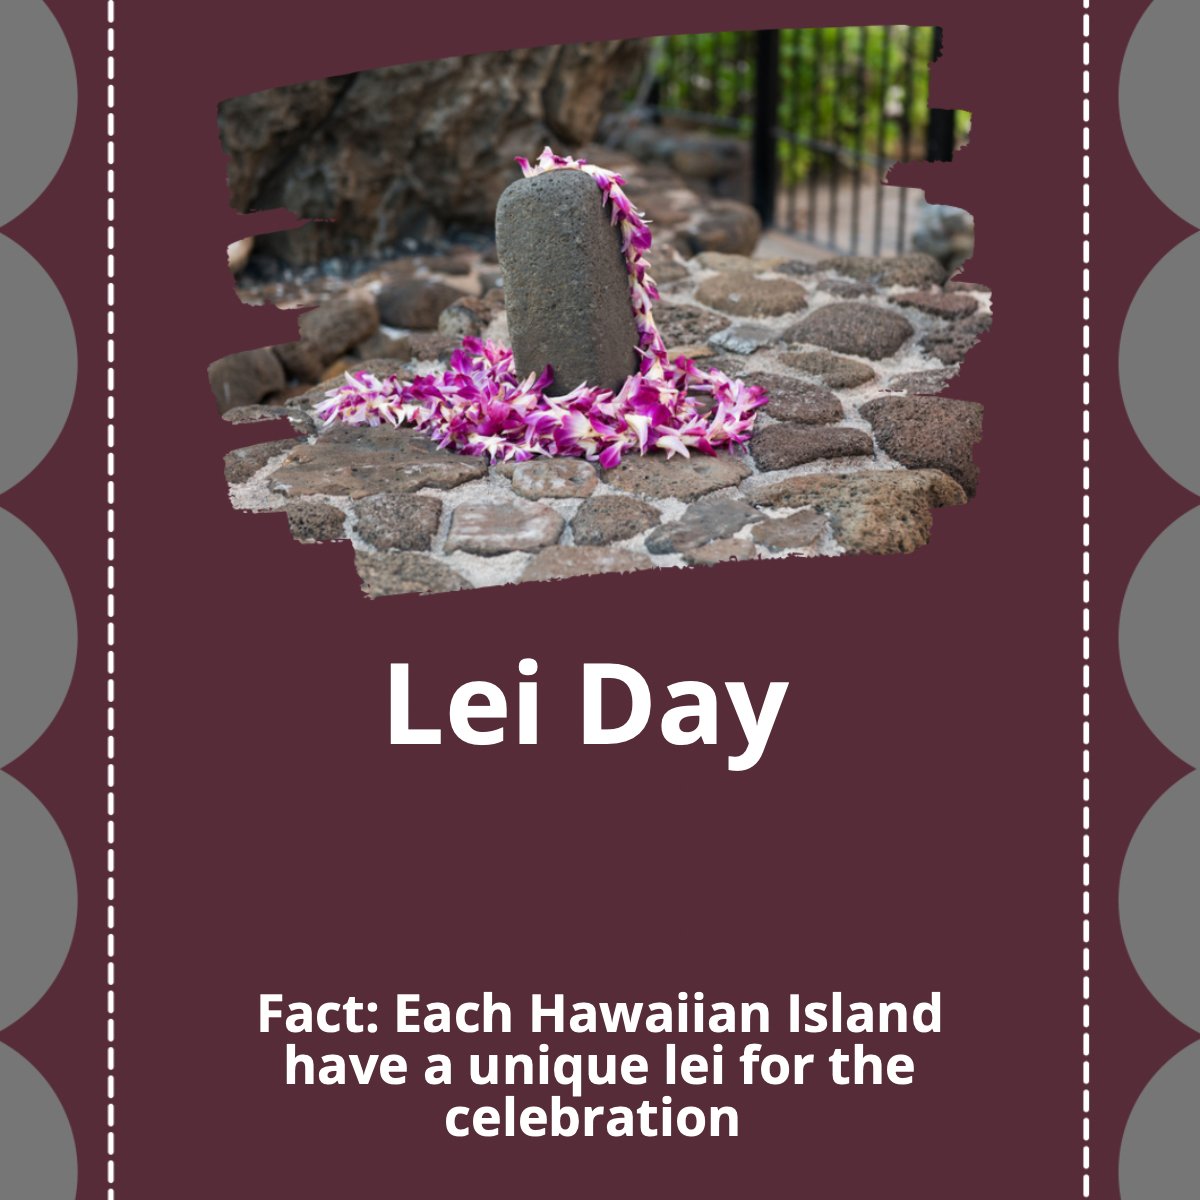 Happy Lei Day to all who celebrate 🙌!

Did you know? 🤔  Each Hawaiian island has a unique lei for the celebration. 😱

#lei #day #hawaii #flowers #celebration #grey
 #longandfosterrealestate #thebesthouse #realorlife #homebuying #homeselling